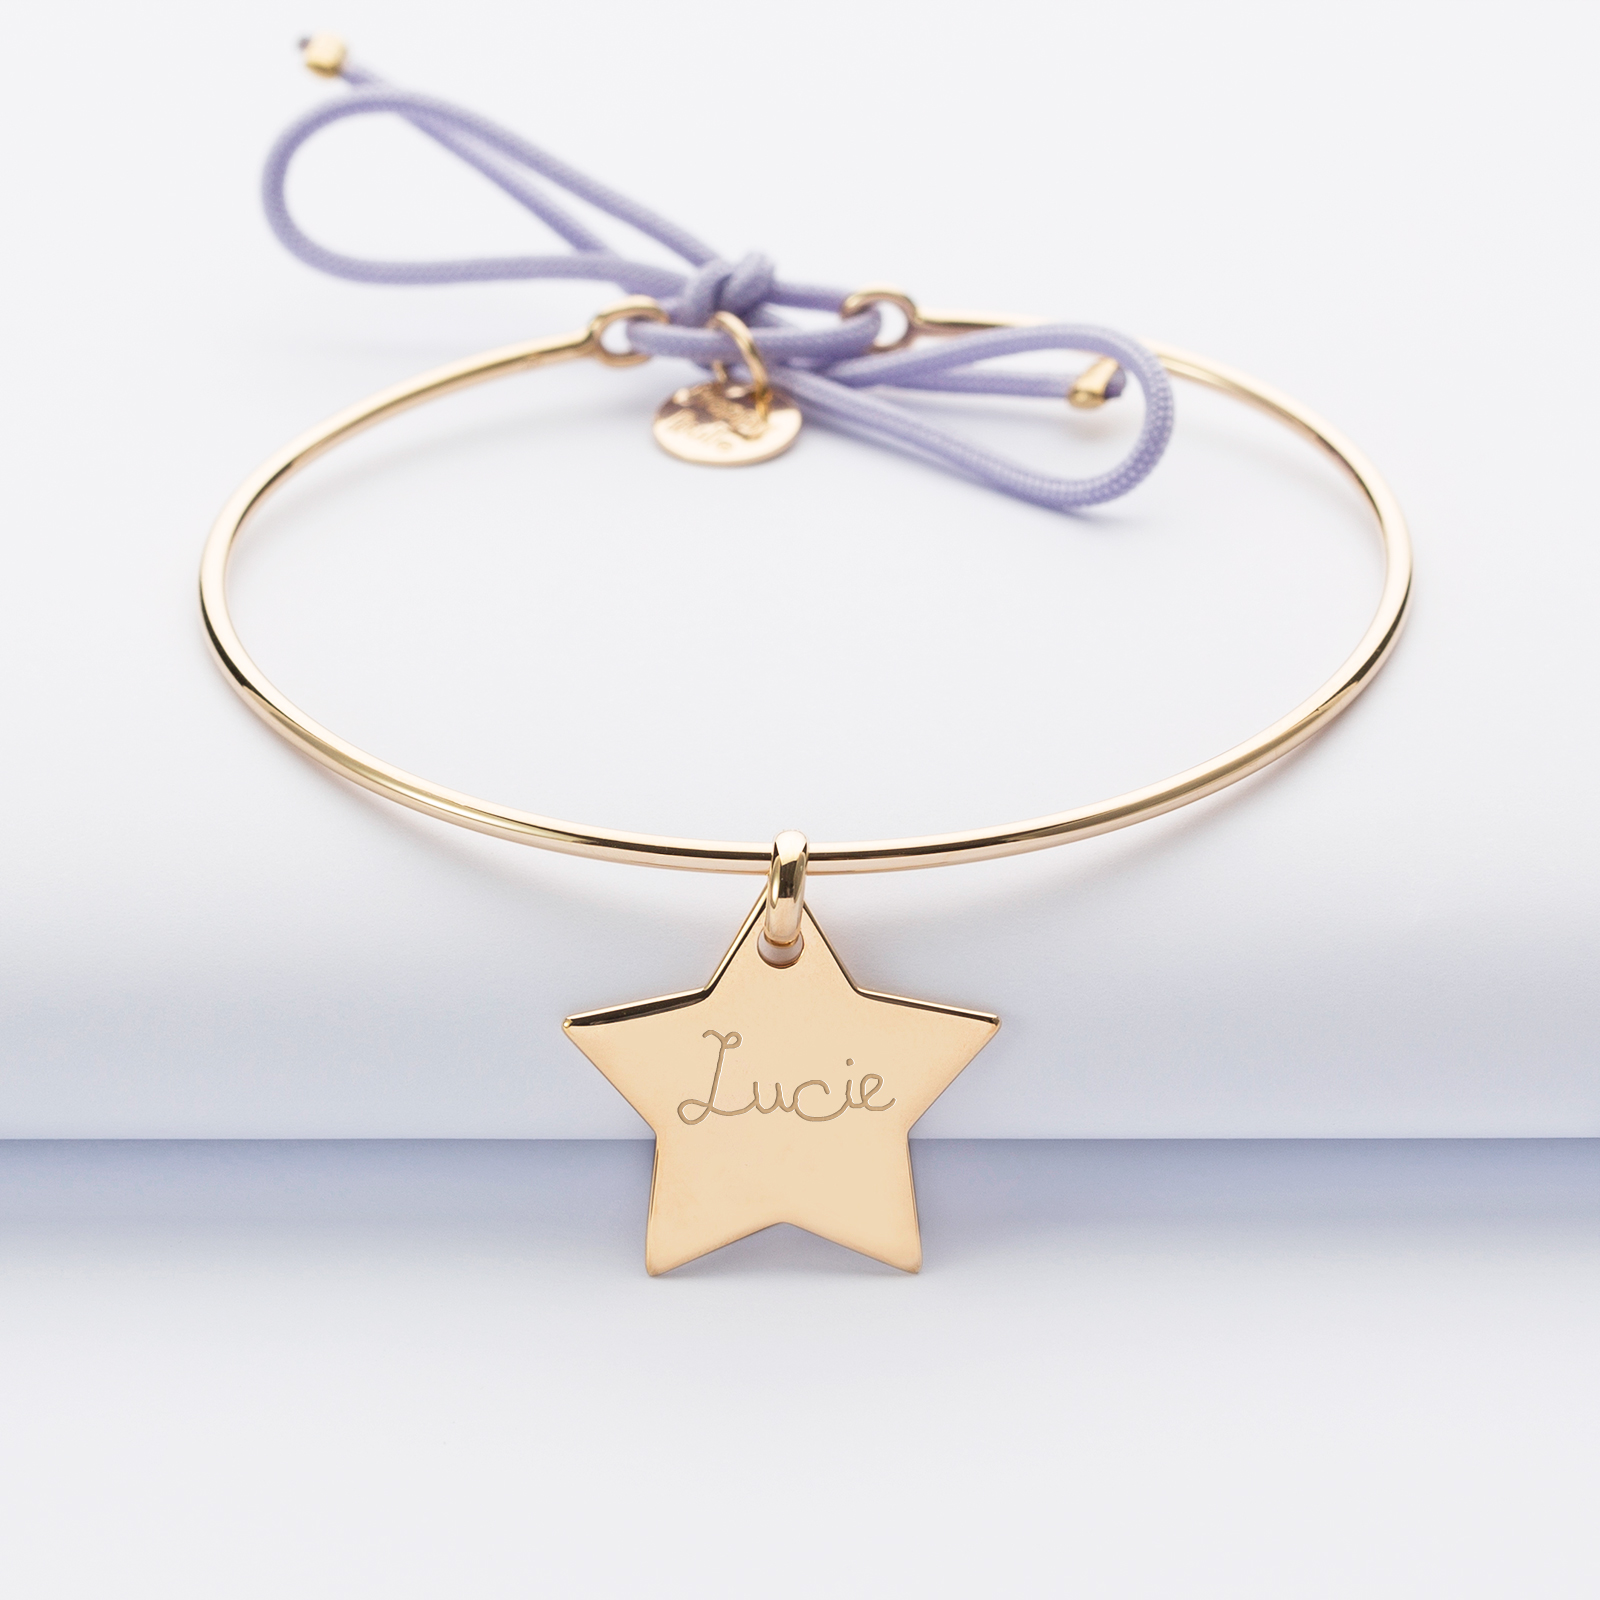 Personalised gold plated bangle with cord and engraved star medallion 20x20mm name 1